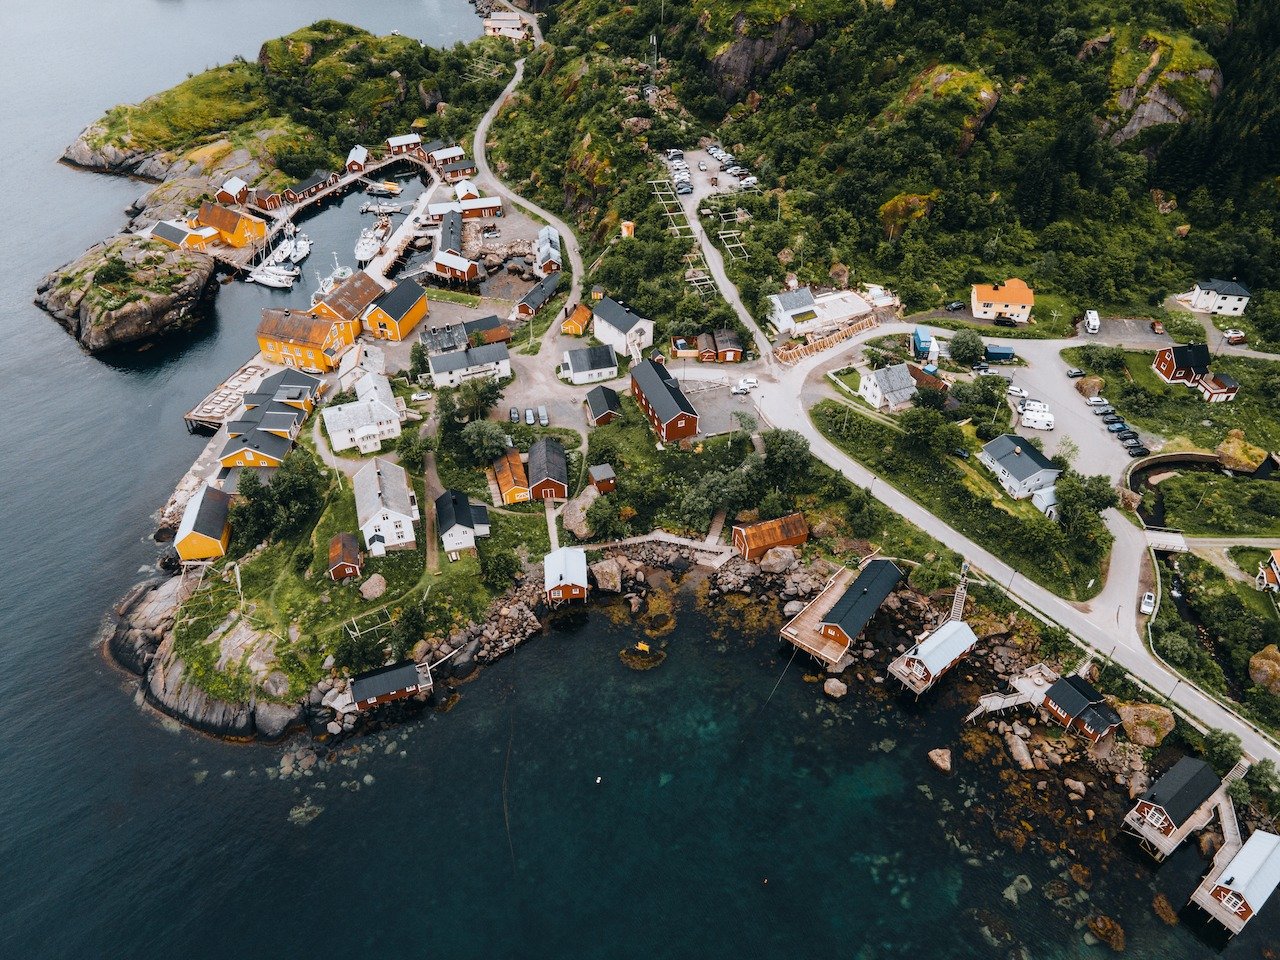 📍 Nusfjord, Lotofen, Norway

This idyllic village in Norway is called Nusfjord. It&rsquo;s situated in the Lofoten islands and is everything you would want in a home away from home. The cabins here, most with their own sauna and a small bit of coast